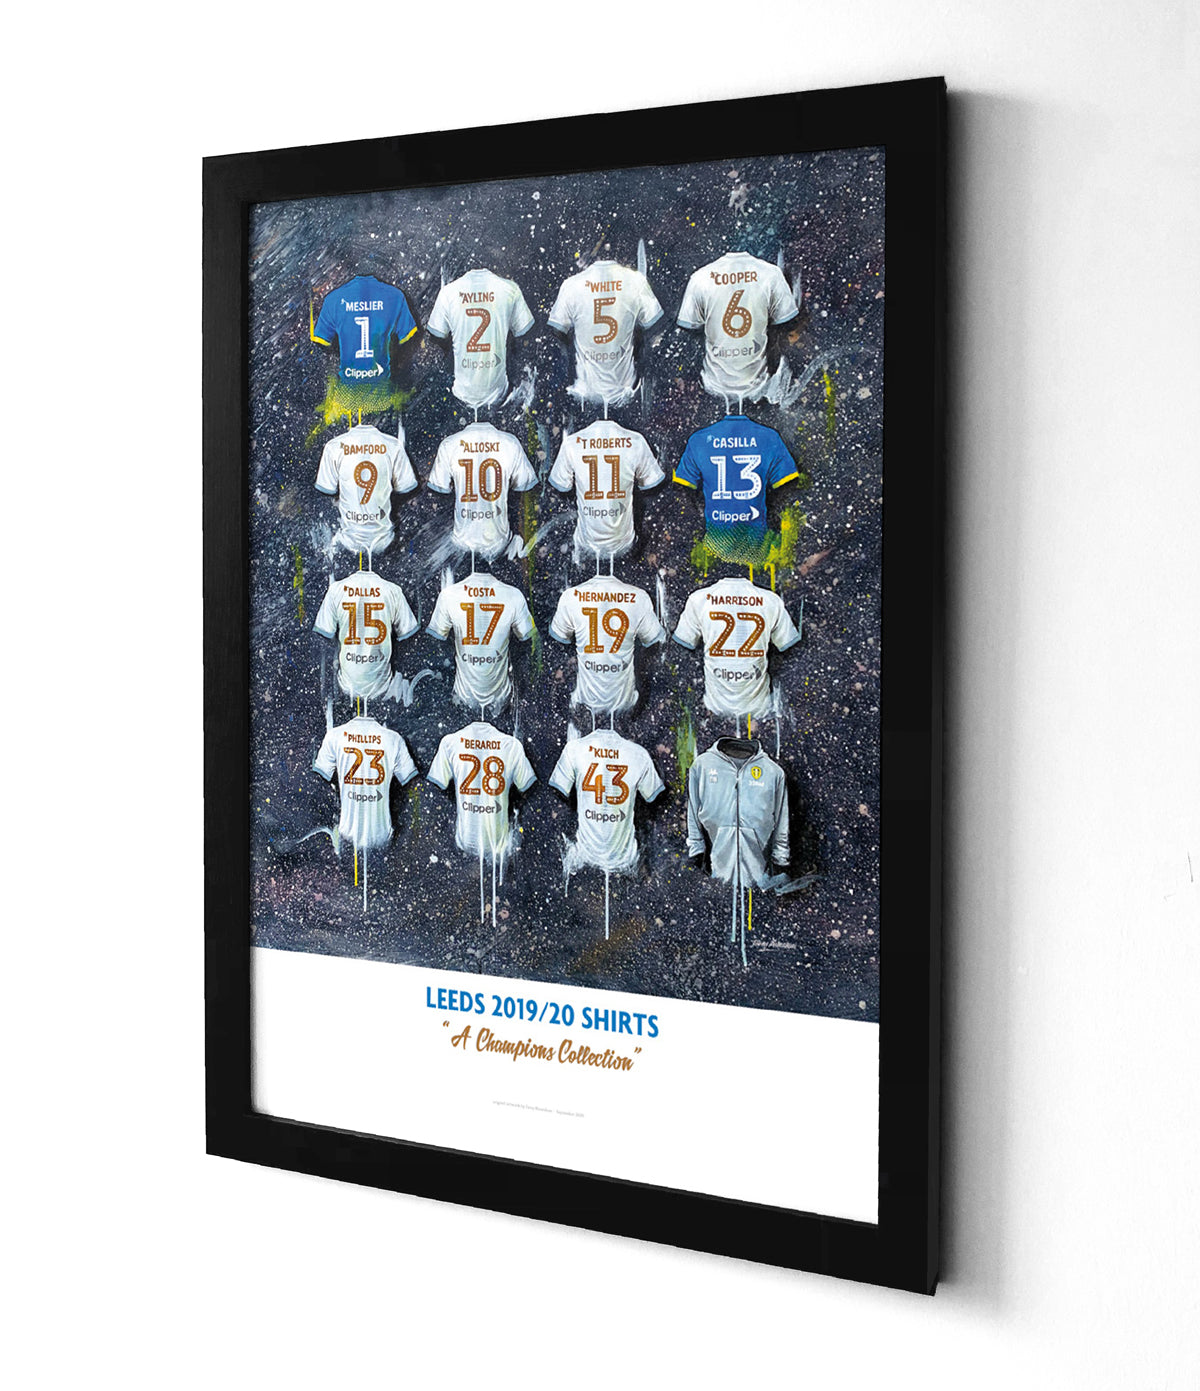 A limited edition print by Terry Kneeshaw featuring 16 iconic Leeds United football jerseys celebrating their championship-winning season. The print is size A2 and shows the jerseys from different eras arranged in a grid pattern against a white background. The jerseys include the iconic yellow and blue kit worn by the team during the 1970s, as well as the current white and blue strip with blue and yellow accents. The print is a celebration of Leeds United's history and achievements.